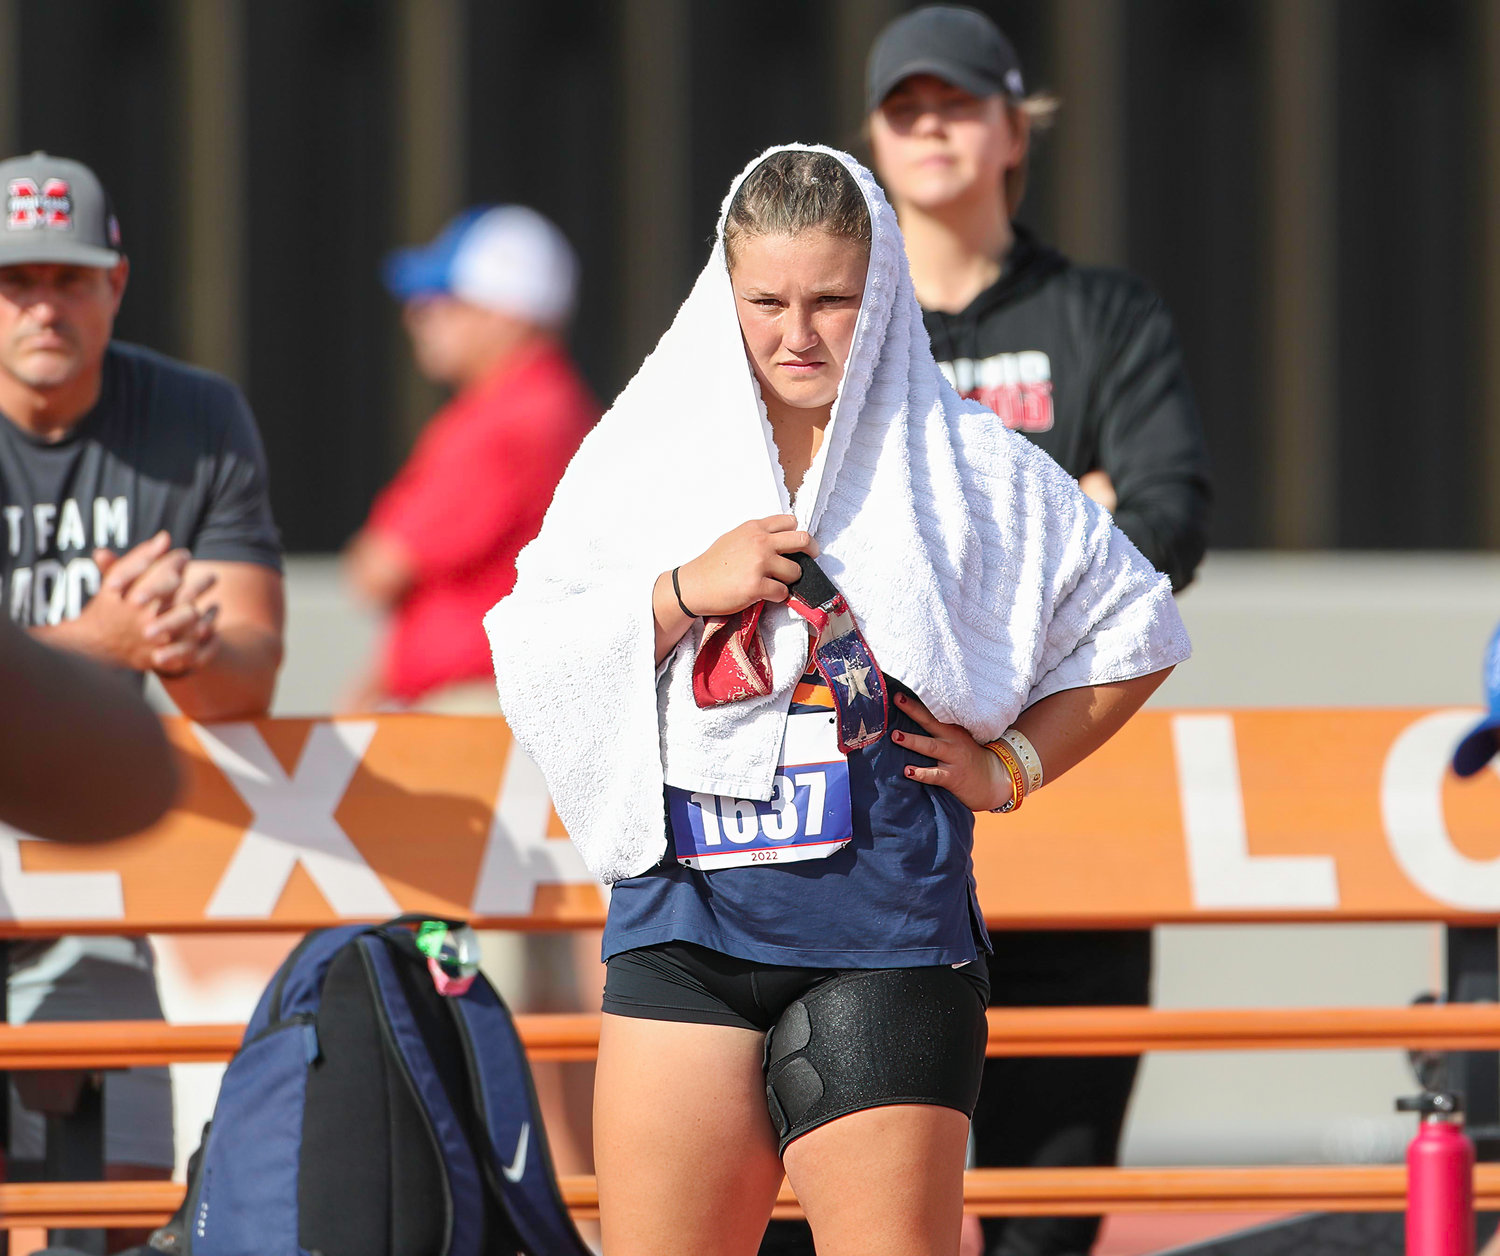 Janey Campbell of Seven Lakes High School waits for her turn to compete in the Class 6A girls shot put event at the UIL State Track and Field Meet on May 14, 2022 in Austin, Texas.